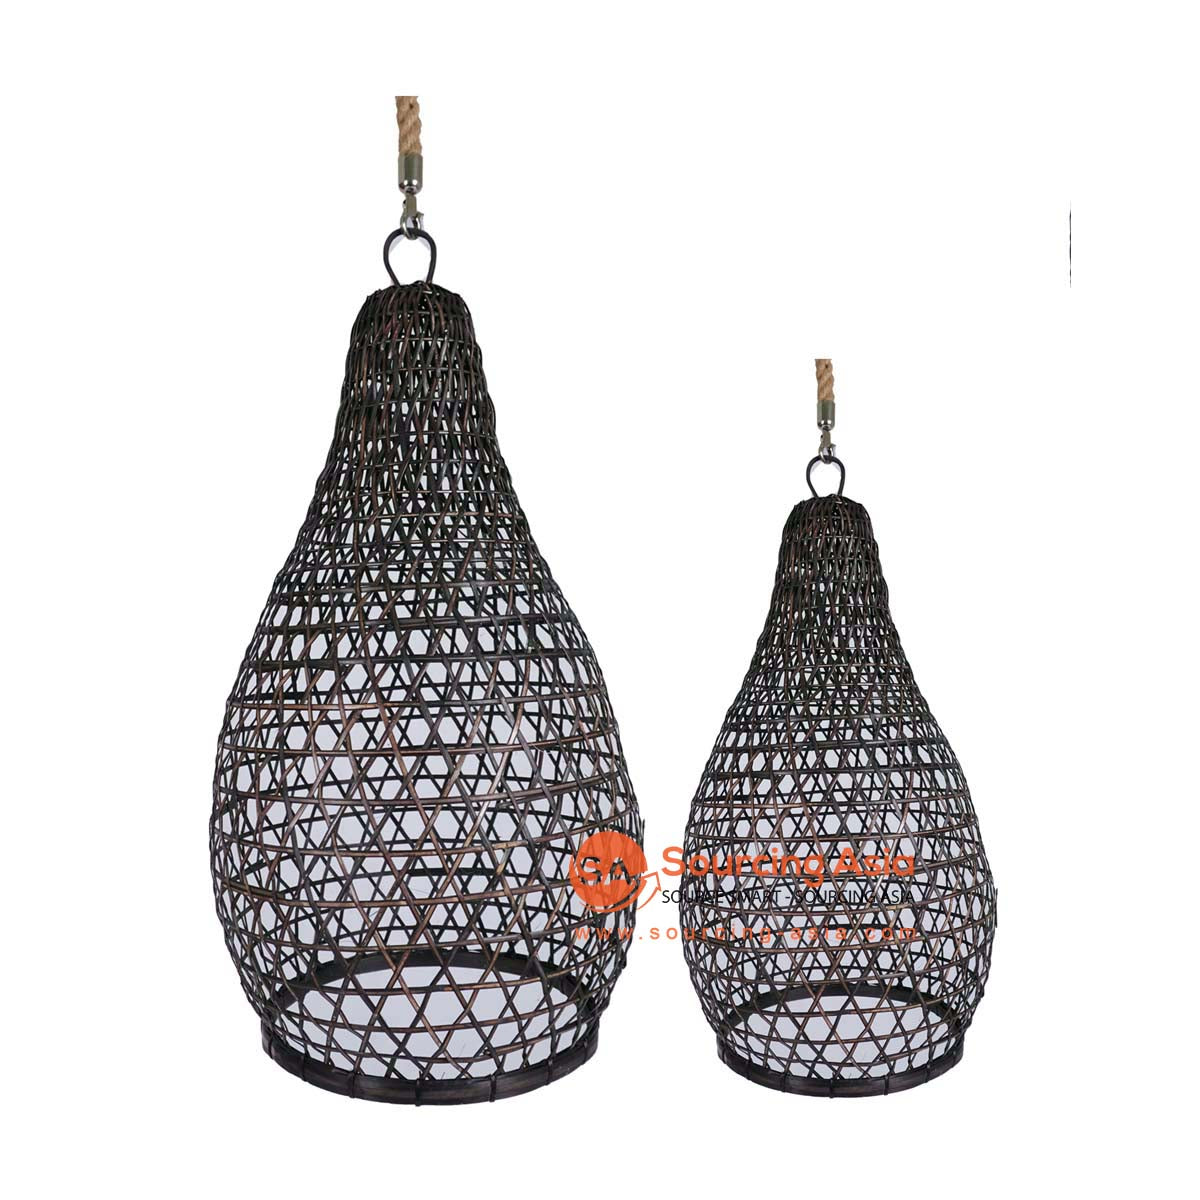 HBSC492 SET OF TWO BLACK RATTAN DECORATIVE CHICKEN CAGE PENDANT LAMPS